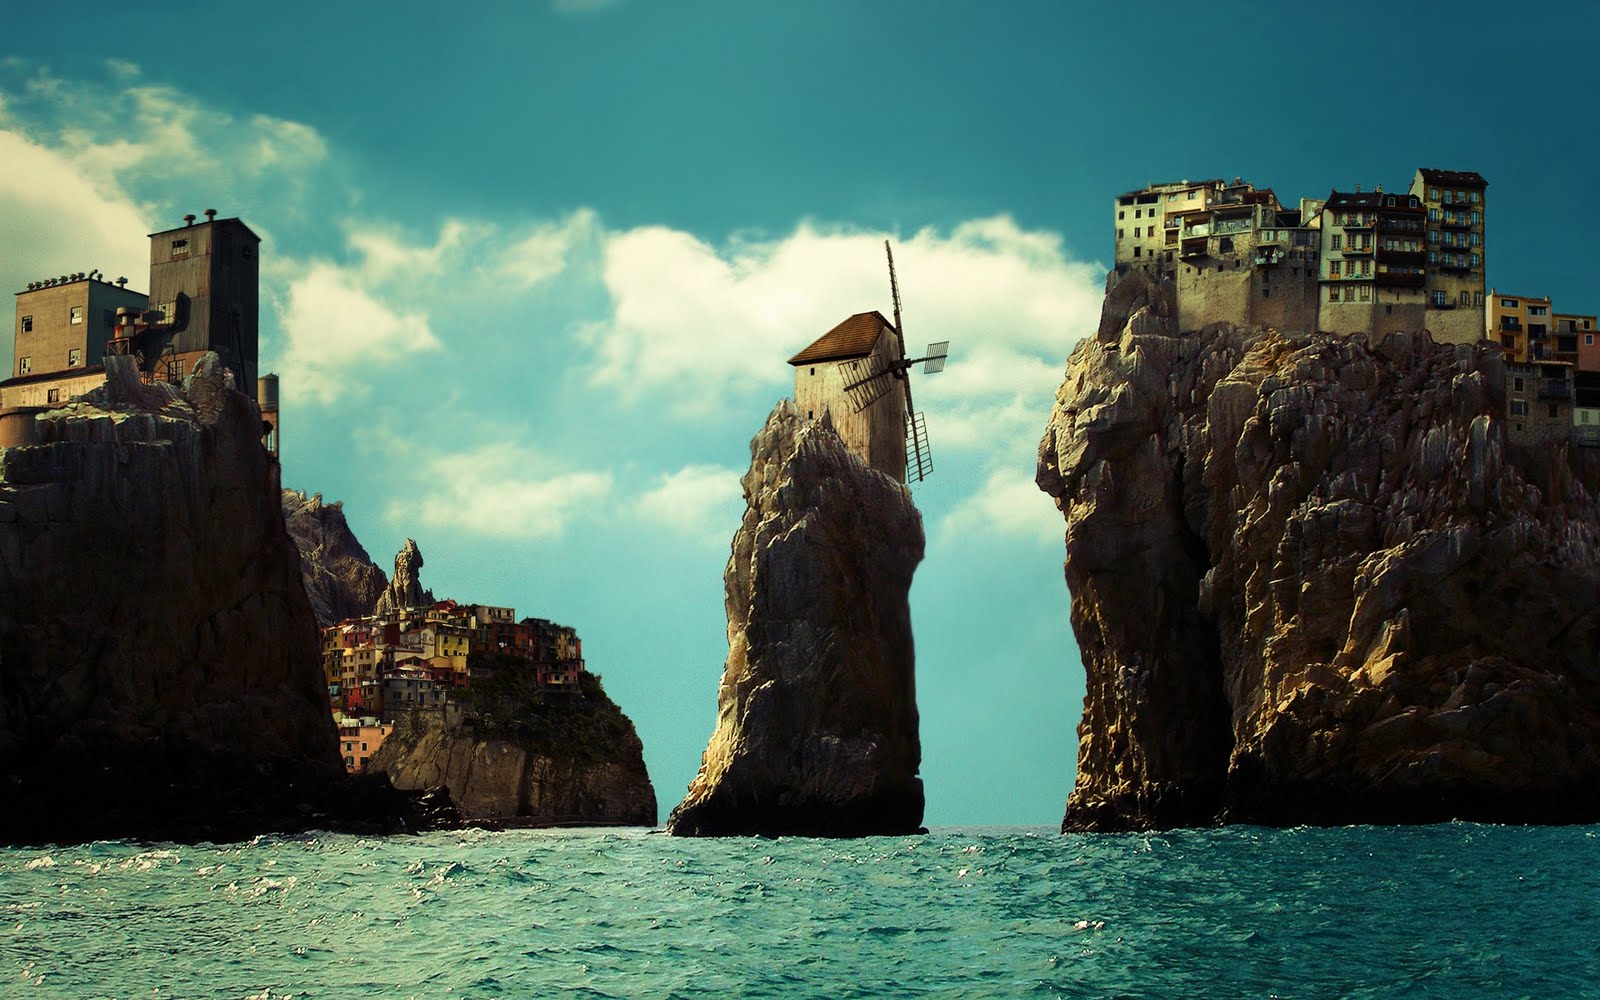 Amazing suspended village over the sea wallpaper The Wallpaper 1600x1000